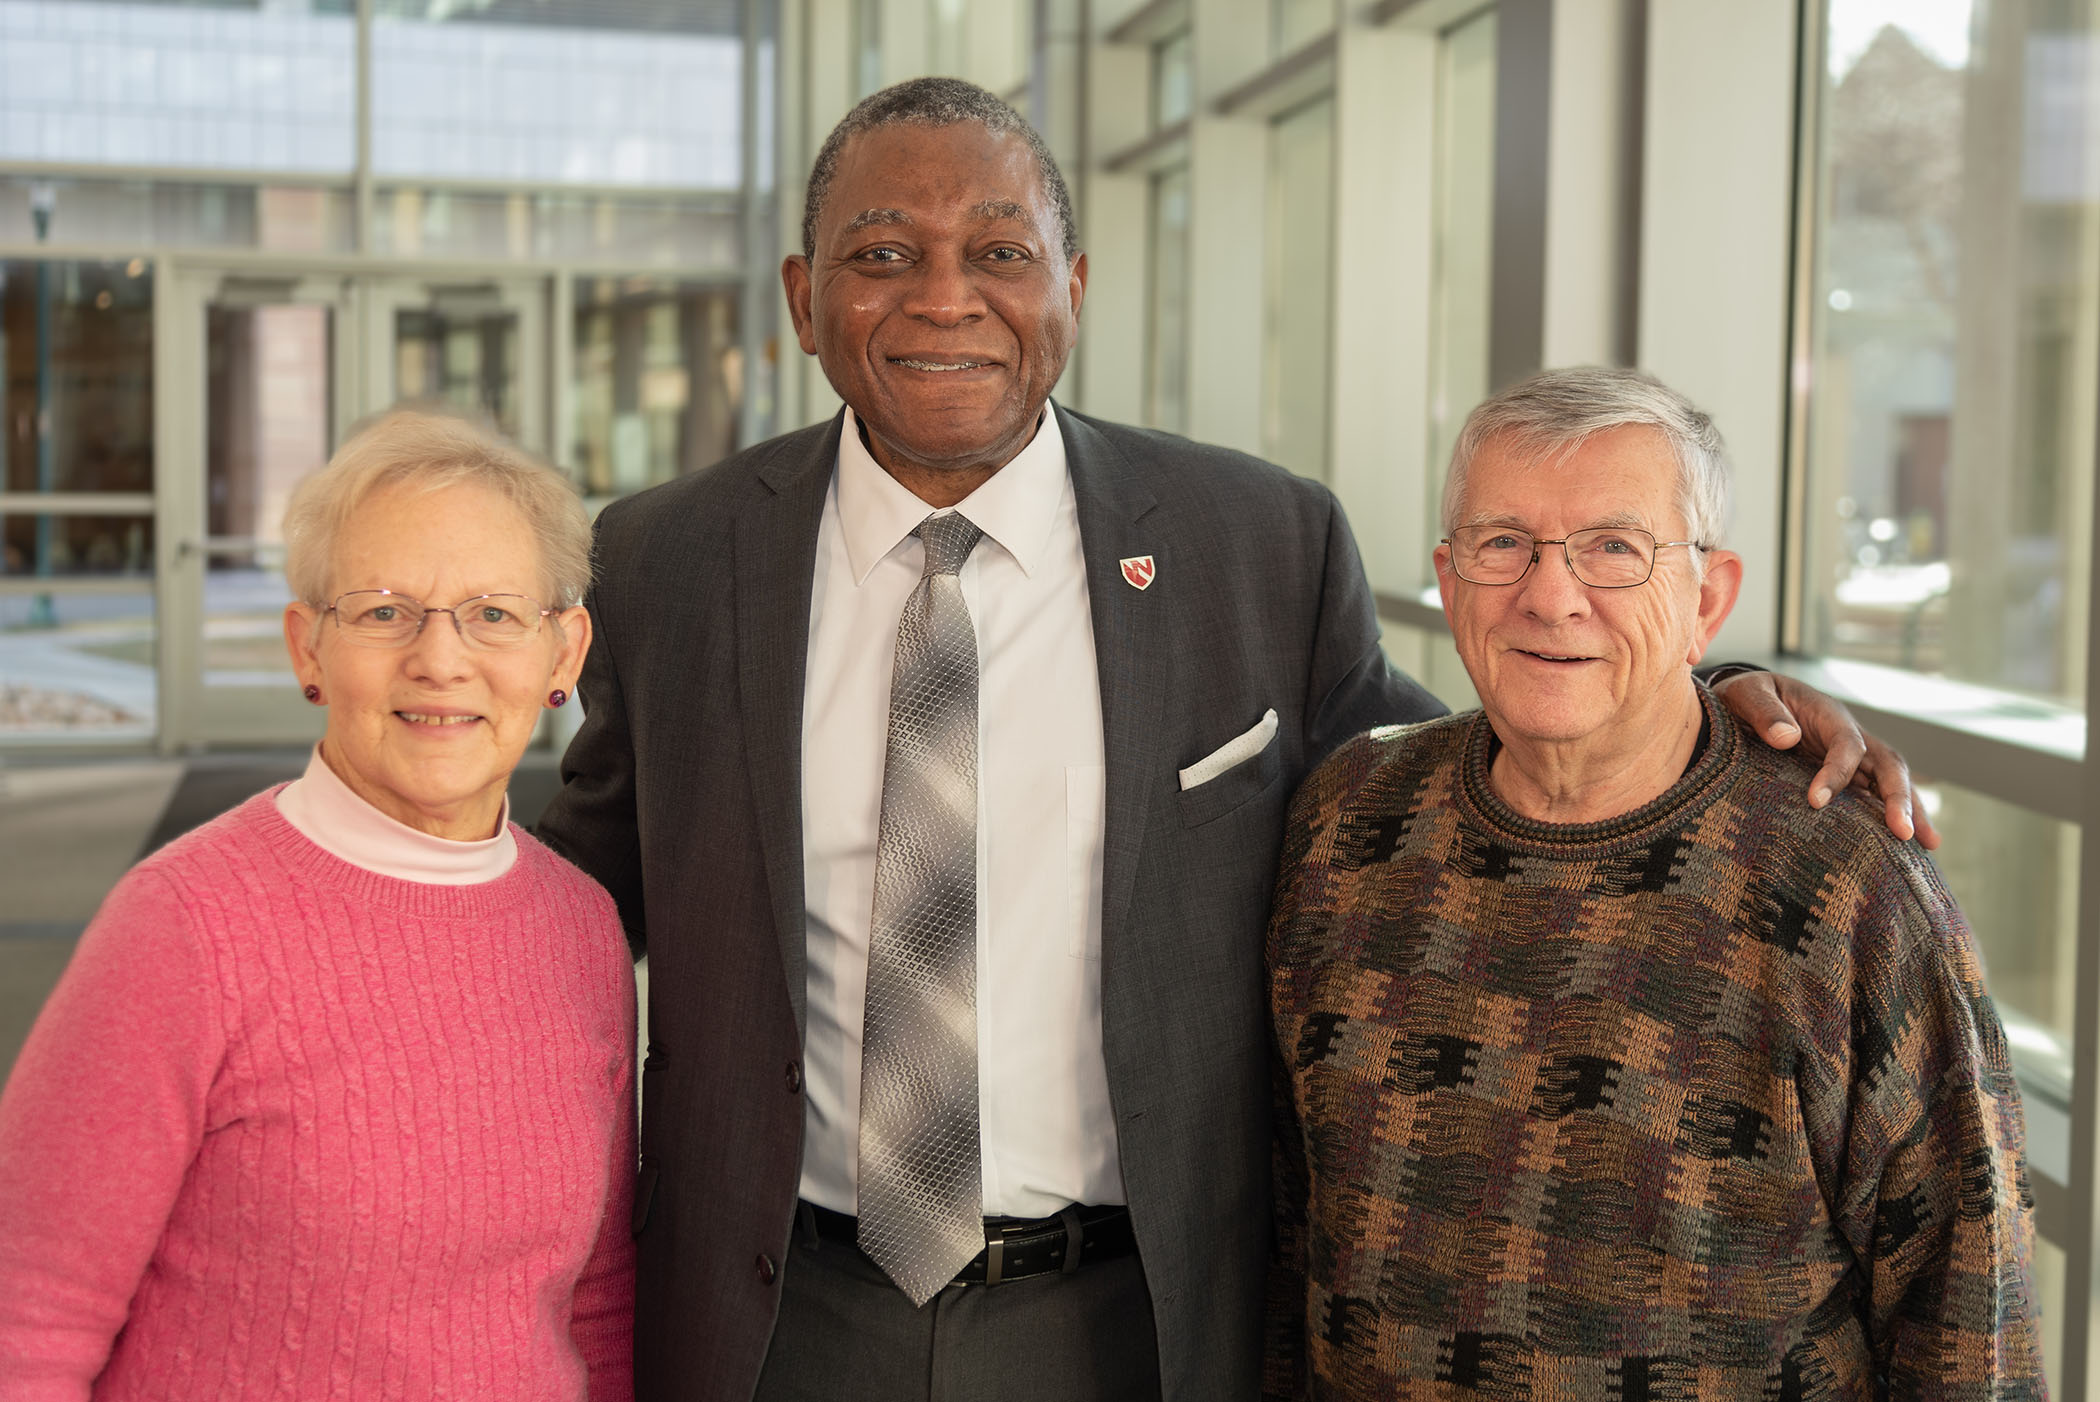 David Crouse&comma; PhD&comma; and wife Sara with Dele Davies&comma; MD&comma; senior vice chancellor for academic affairs and dean of graduate studies